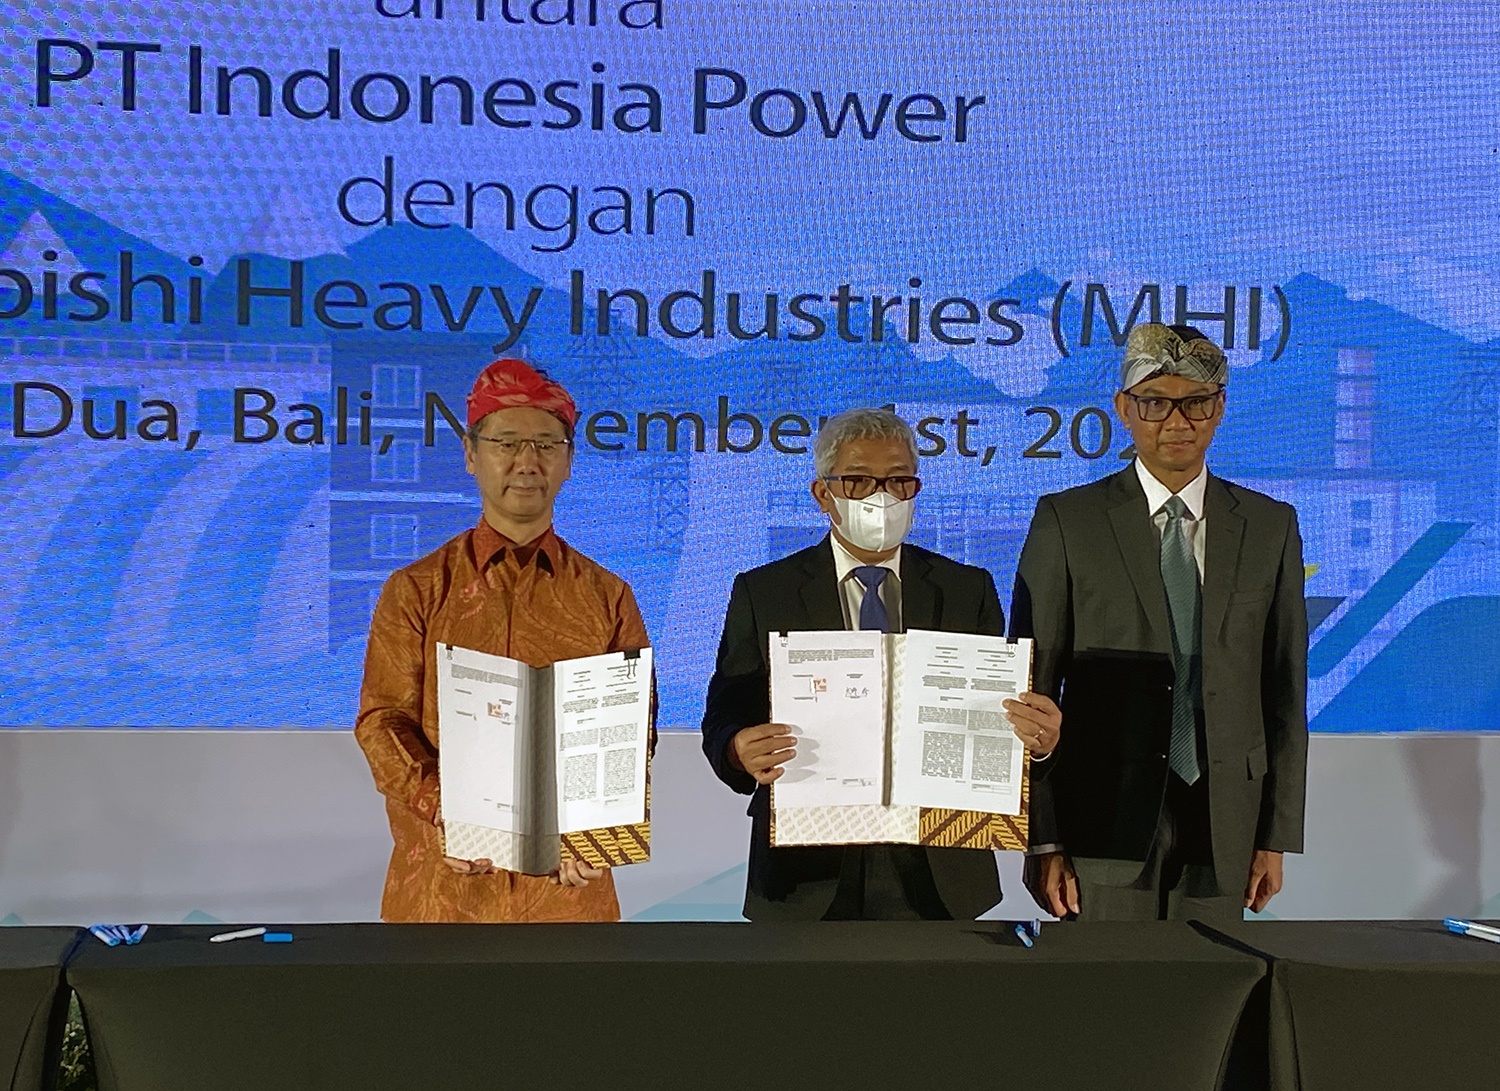 MHI and Indonesia Power research low-carbon power plants across Indonesia